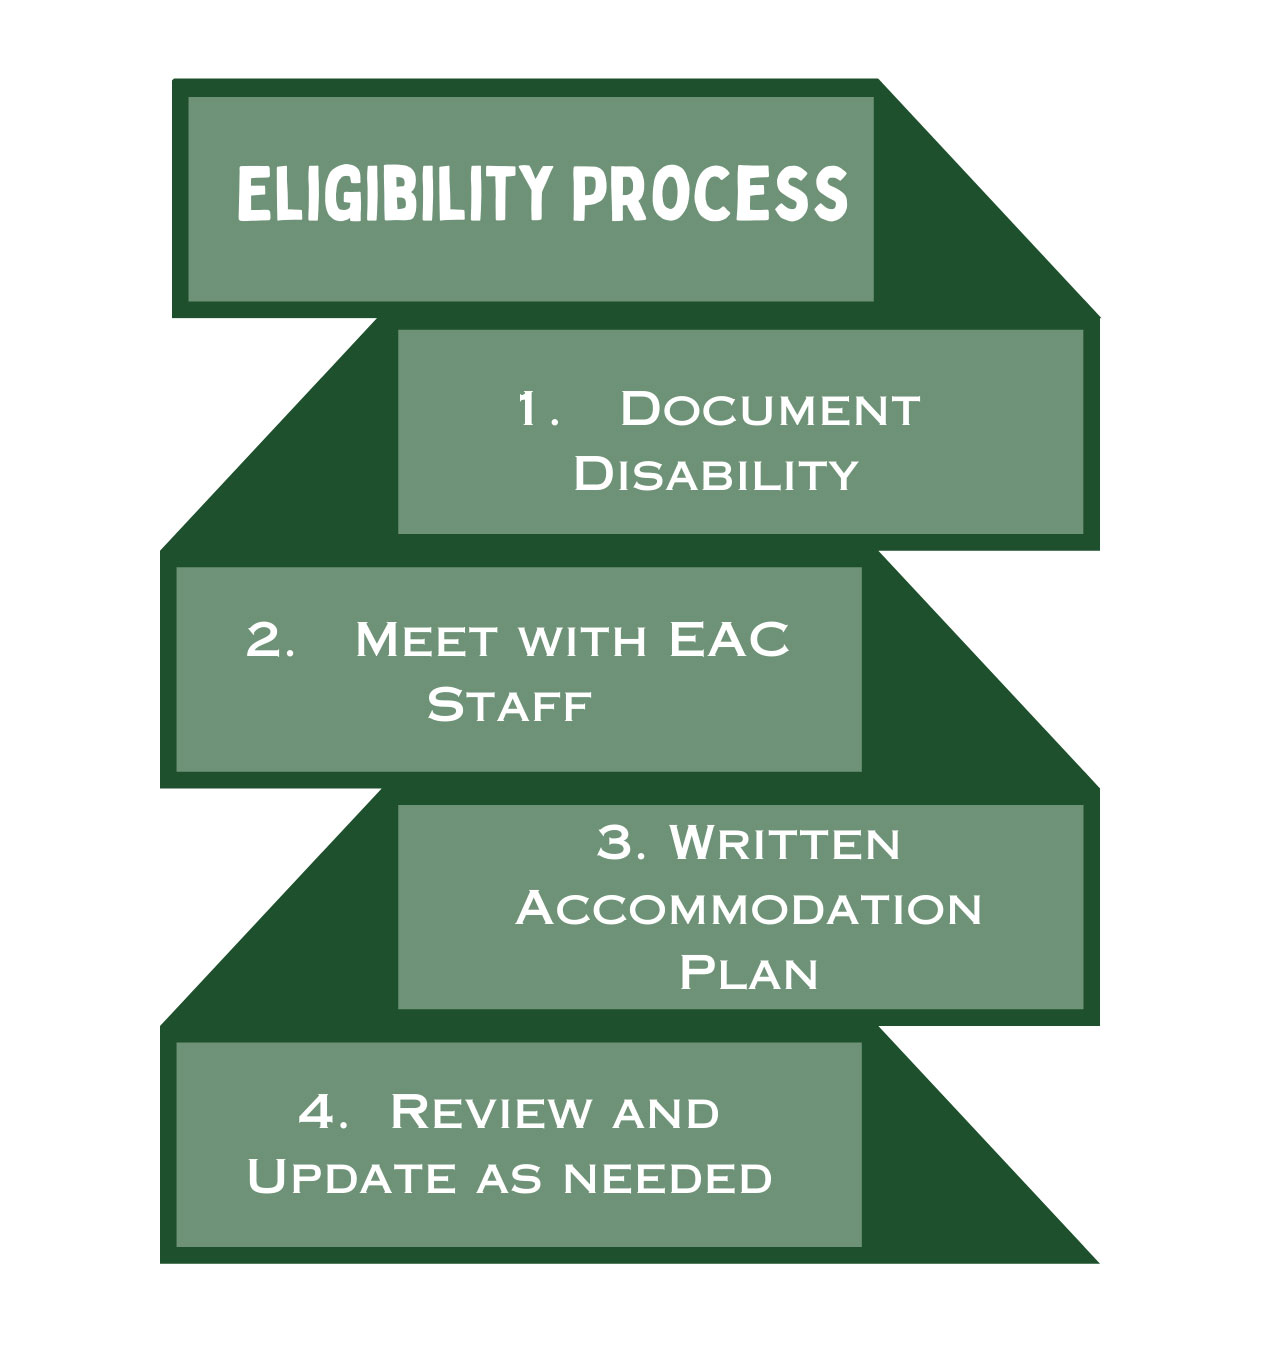 EAC Eligibility Process. Document disability, meet with EAC staff, written accommodation plan, review and update as needed